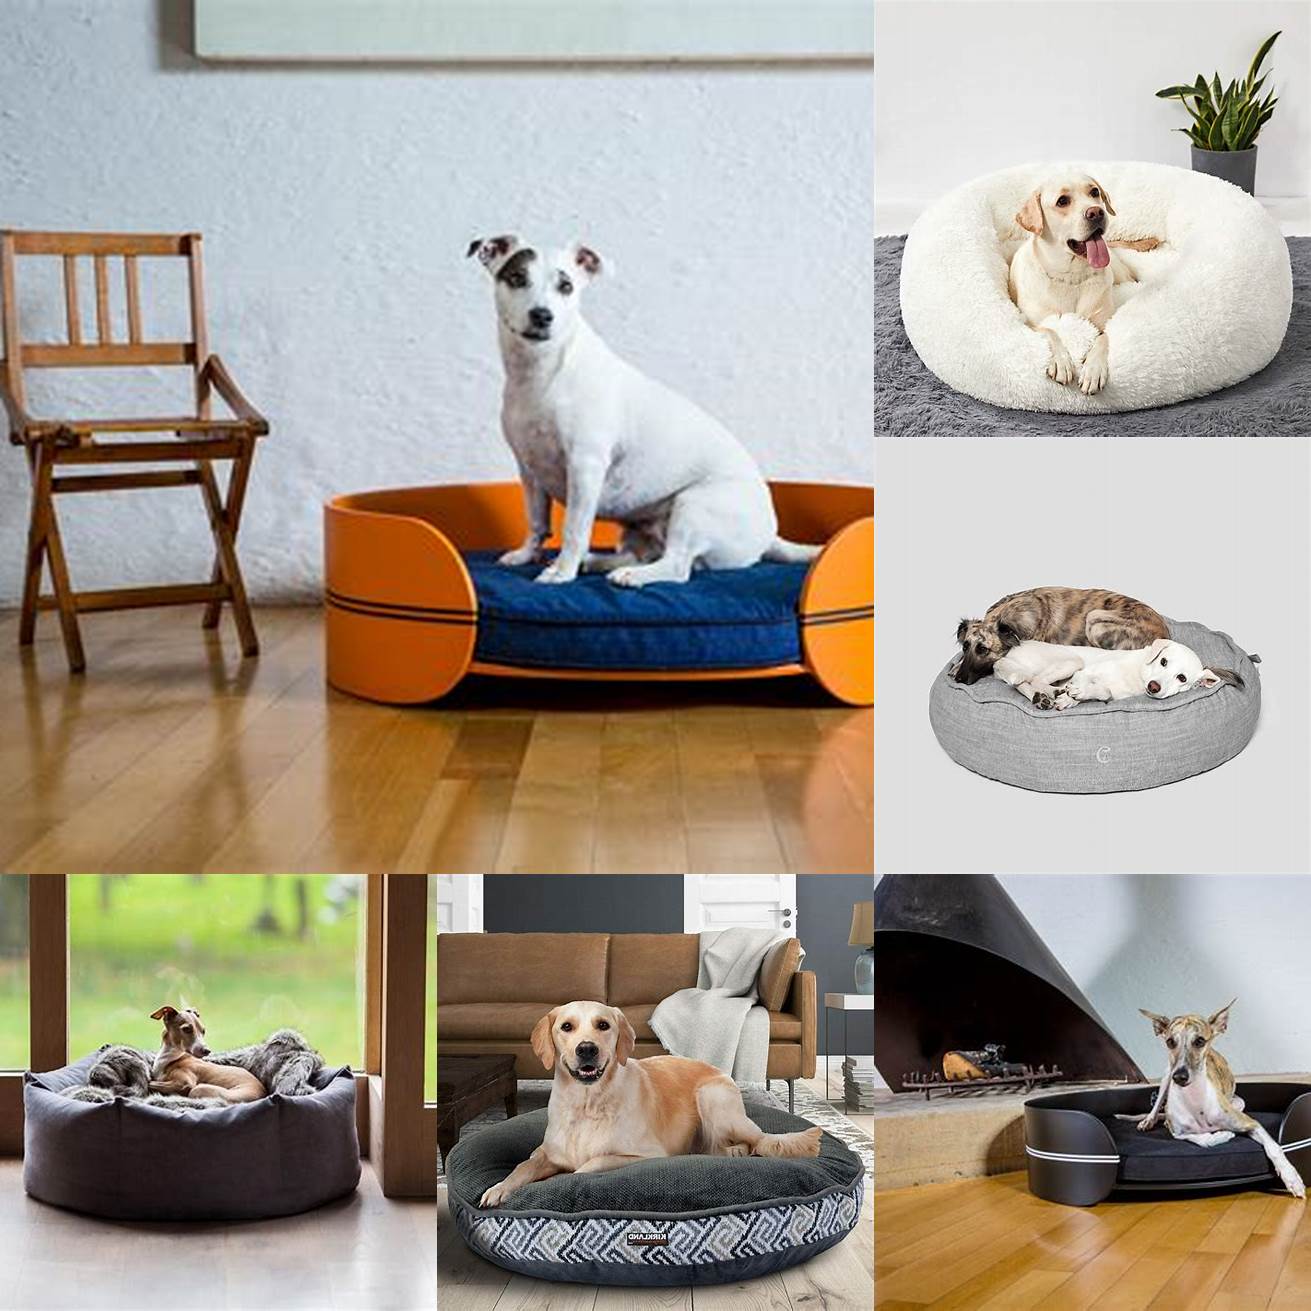 This round bed is perfect for dogs who love to curl up and snooze in style